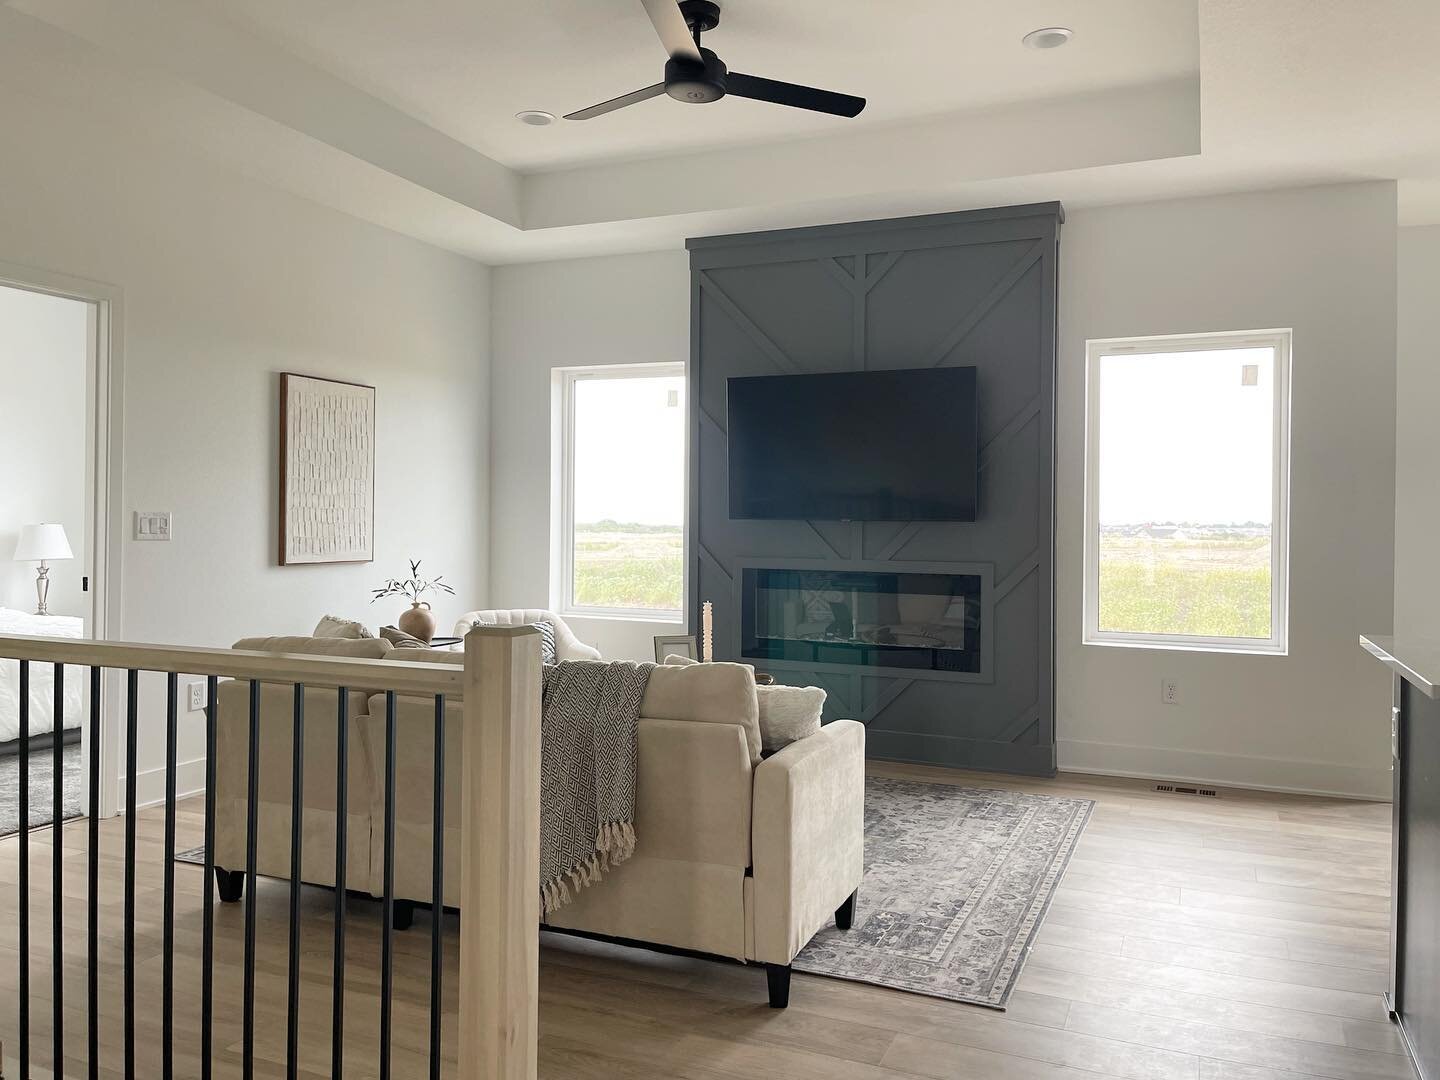 Staging was a success at our #clairebuild - our ranch style Claire Plan in Shadow Creek, Clive. Swipe for a sneak peek or check it out in person at one of its open houses before it&rsquo;s off the market!
.
Realtor | @jasonwaiterealestate 
.
#iowa #i